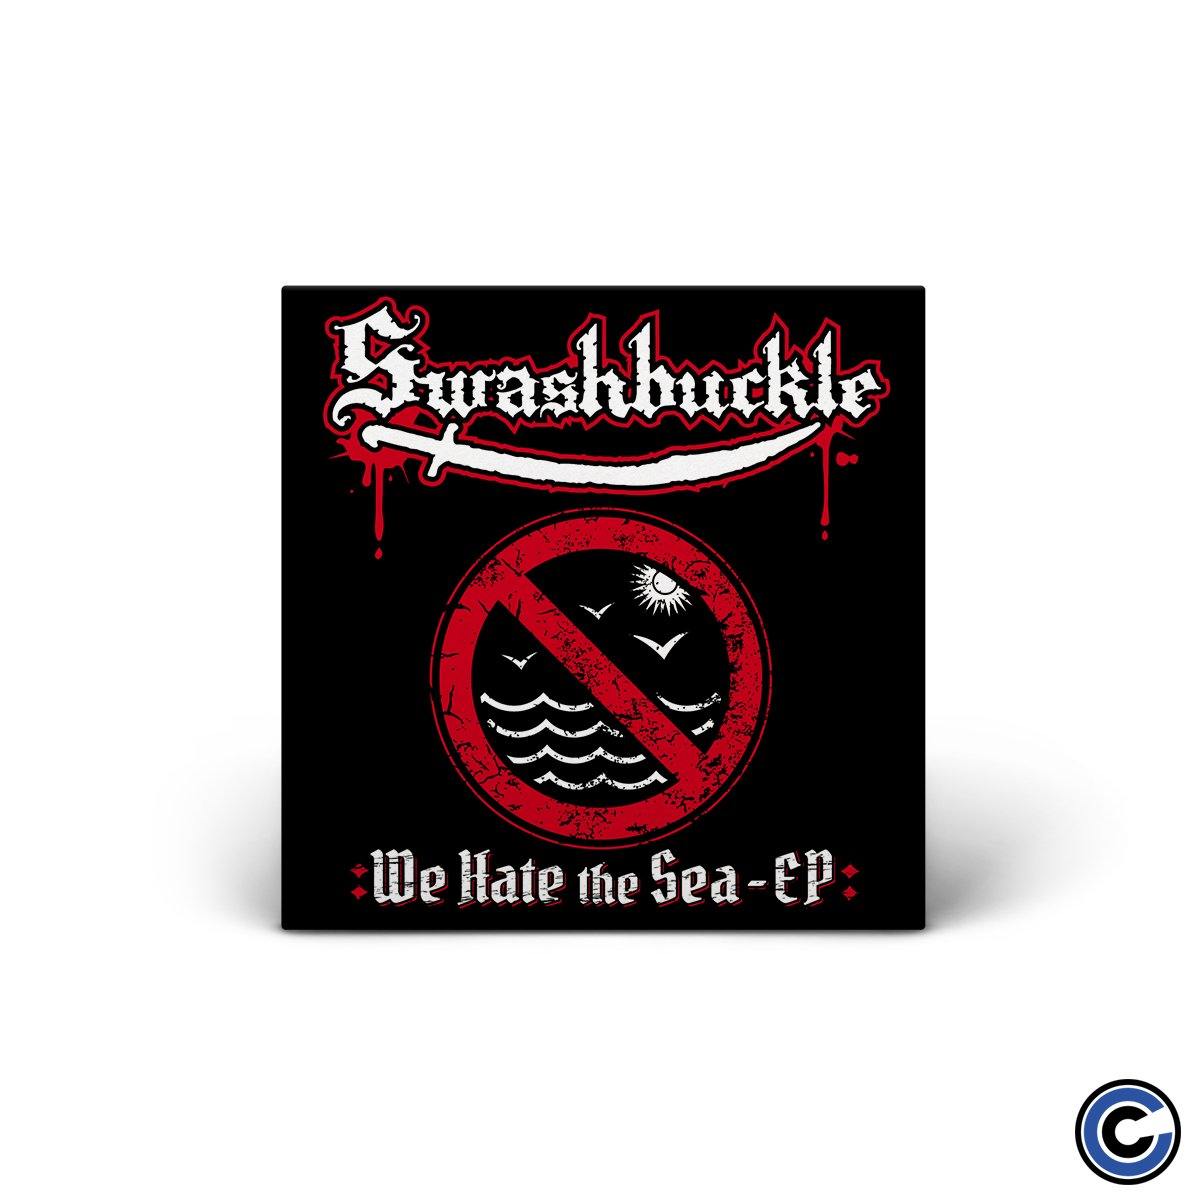 Buy – Swashbuckle "We Hate The Sea" 7" – Band & Music Merch – Cold Cuts Merch